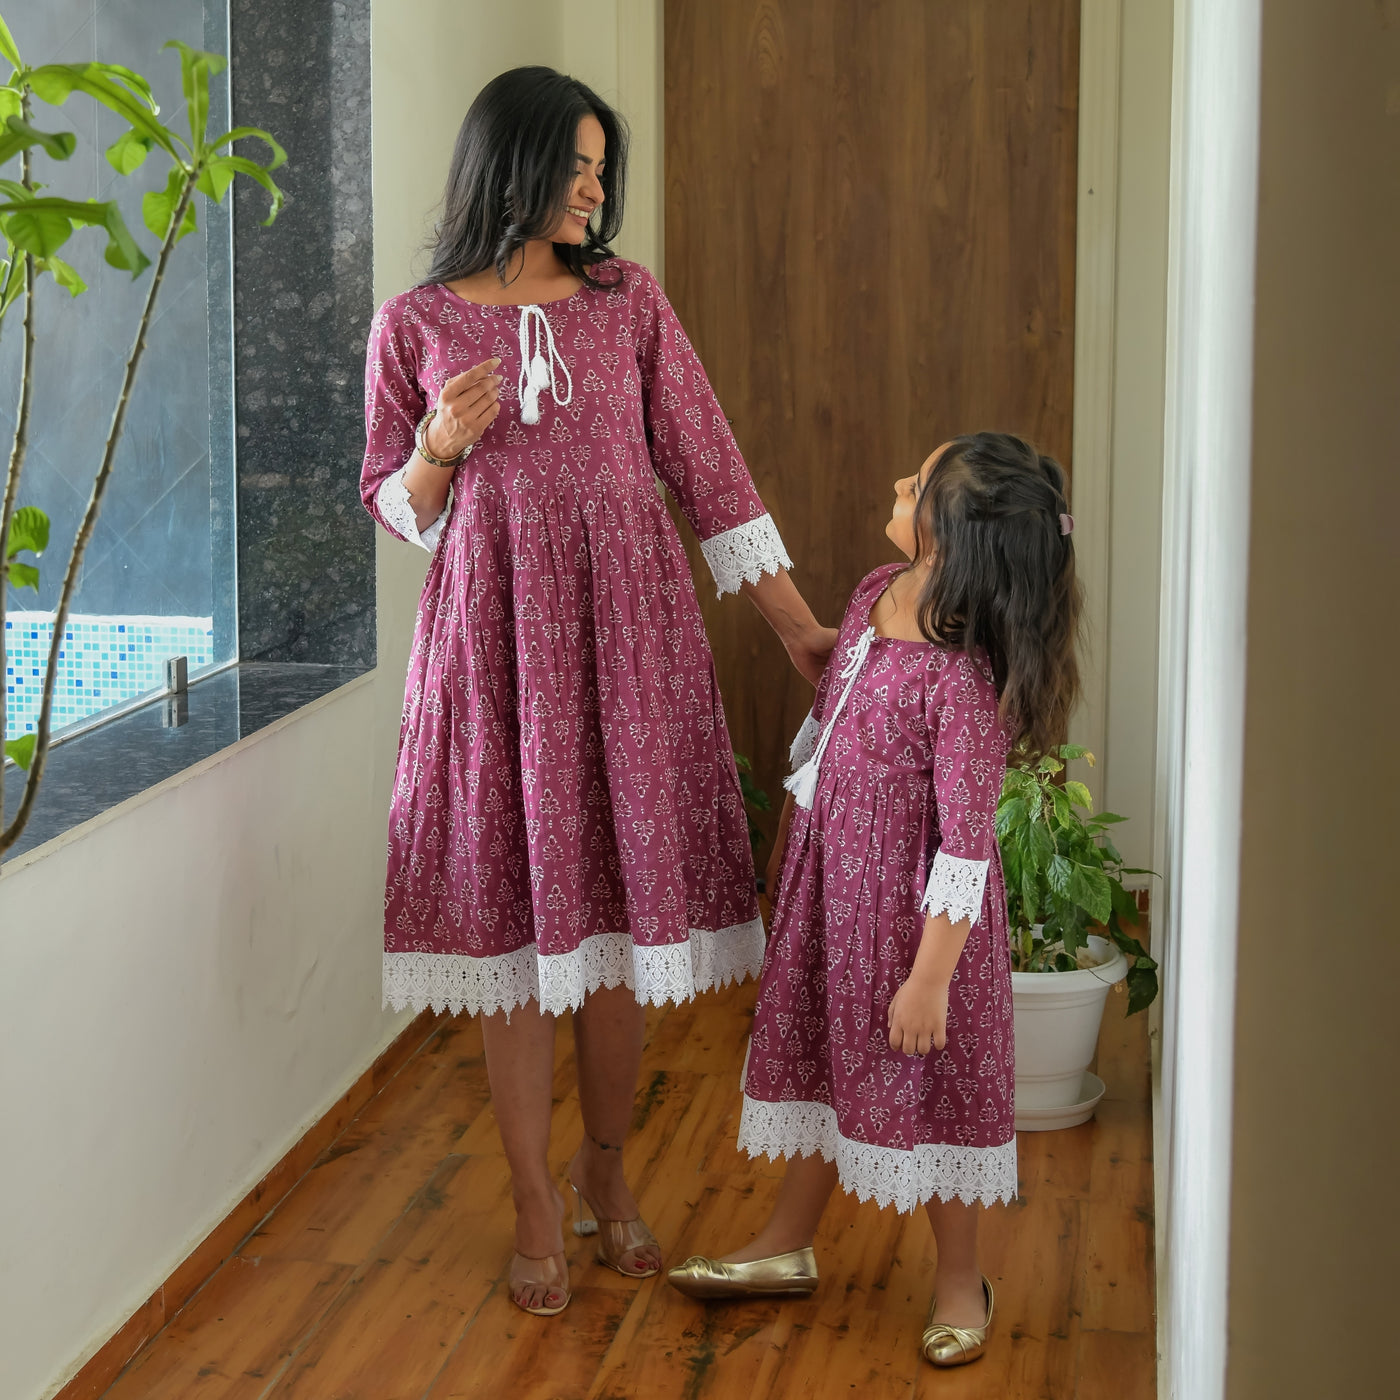 Mom and daughter | Mother daughter dresses matching, Mother daughter  fashion, Mother daughter dress